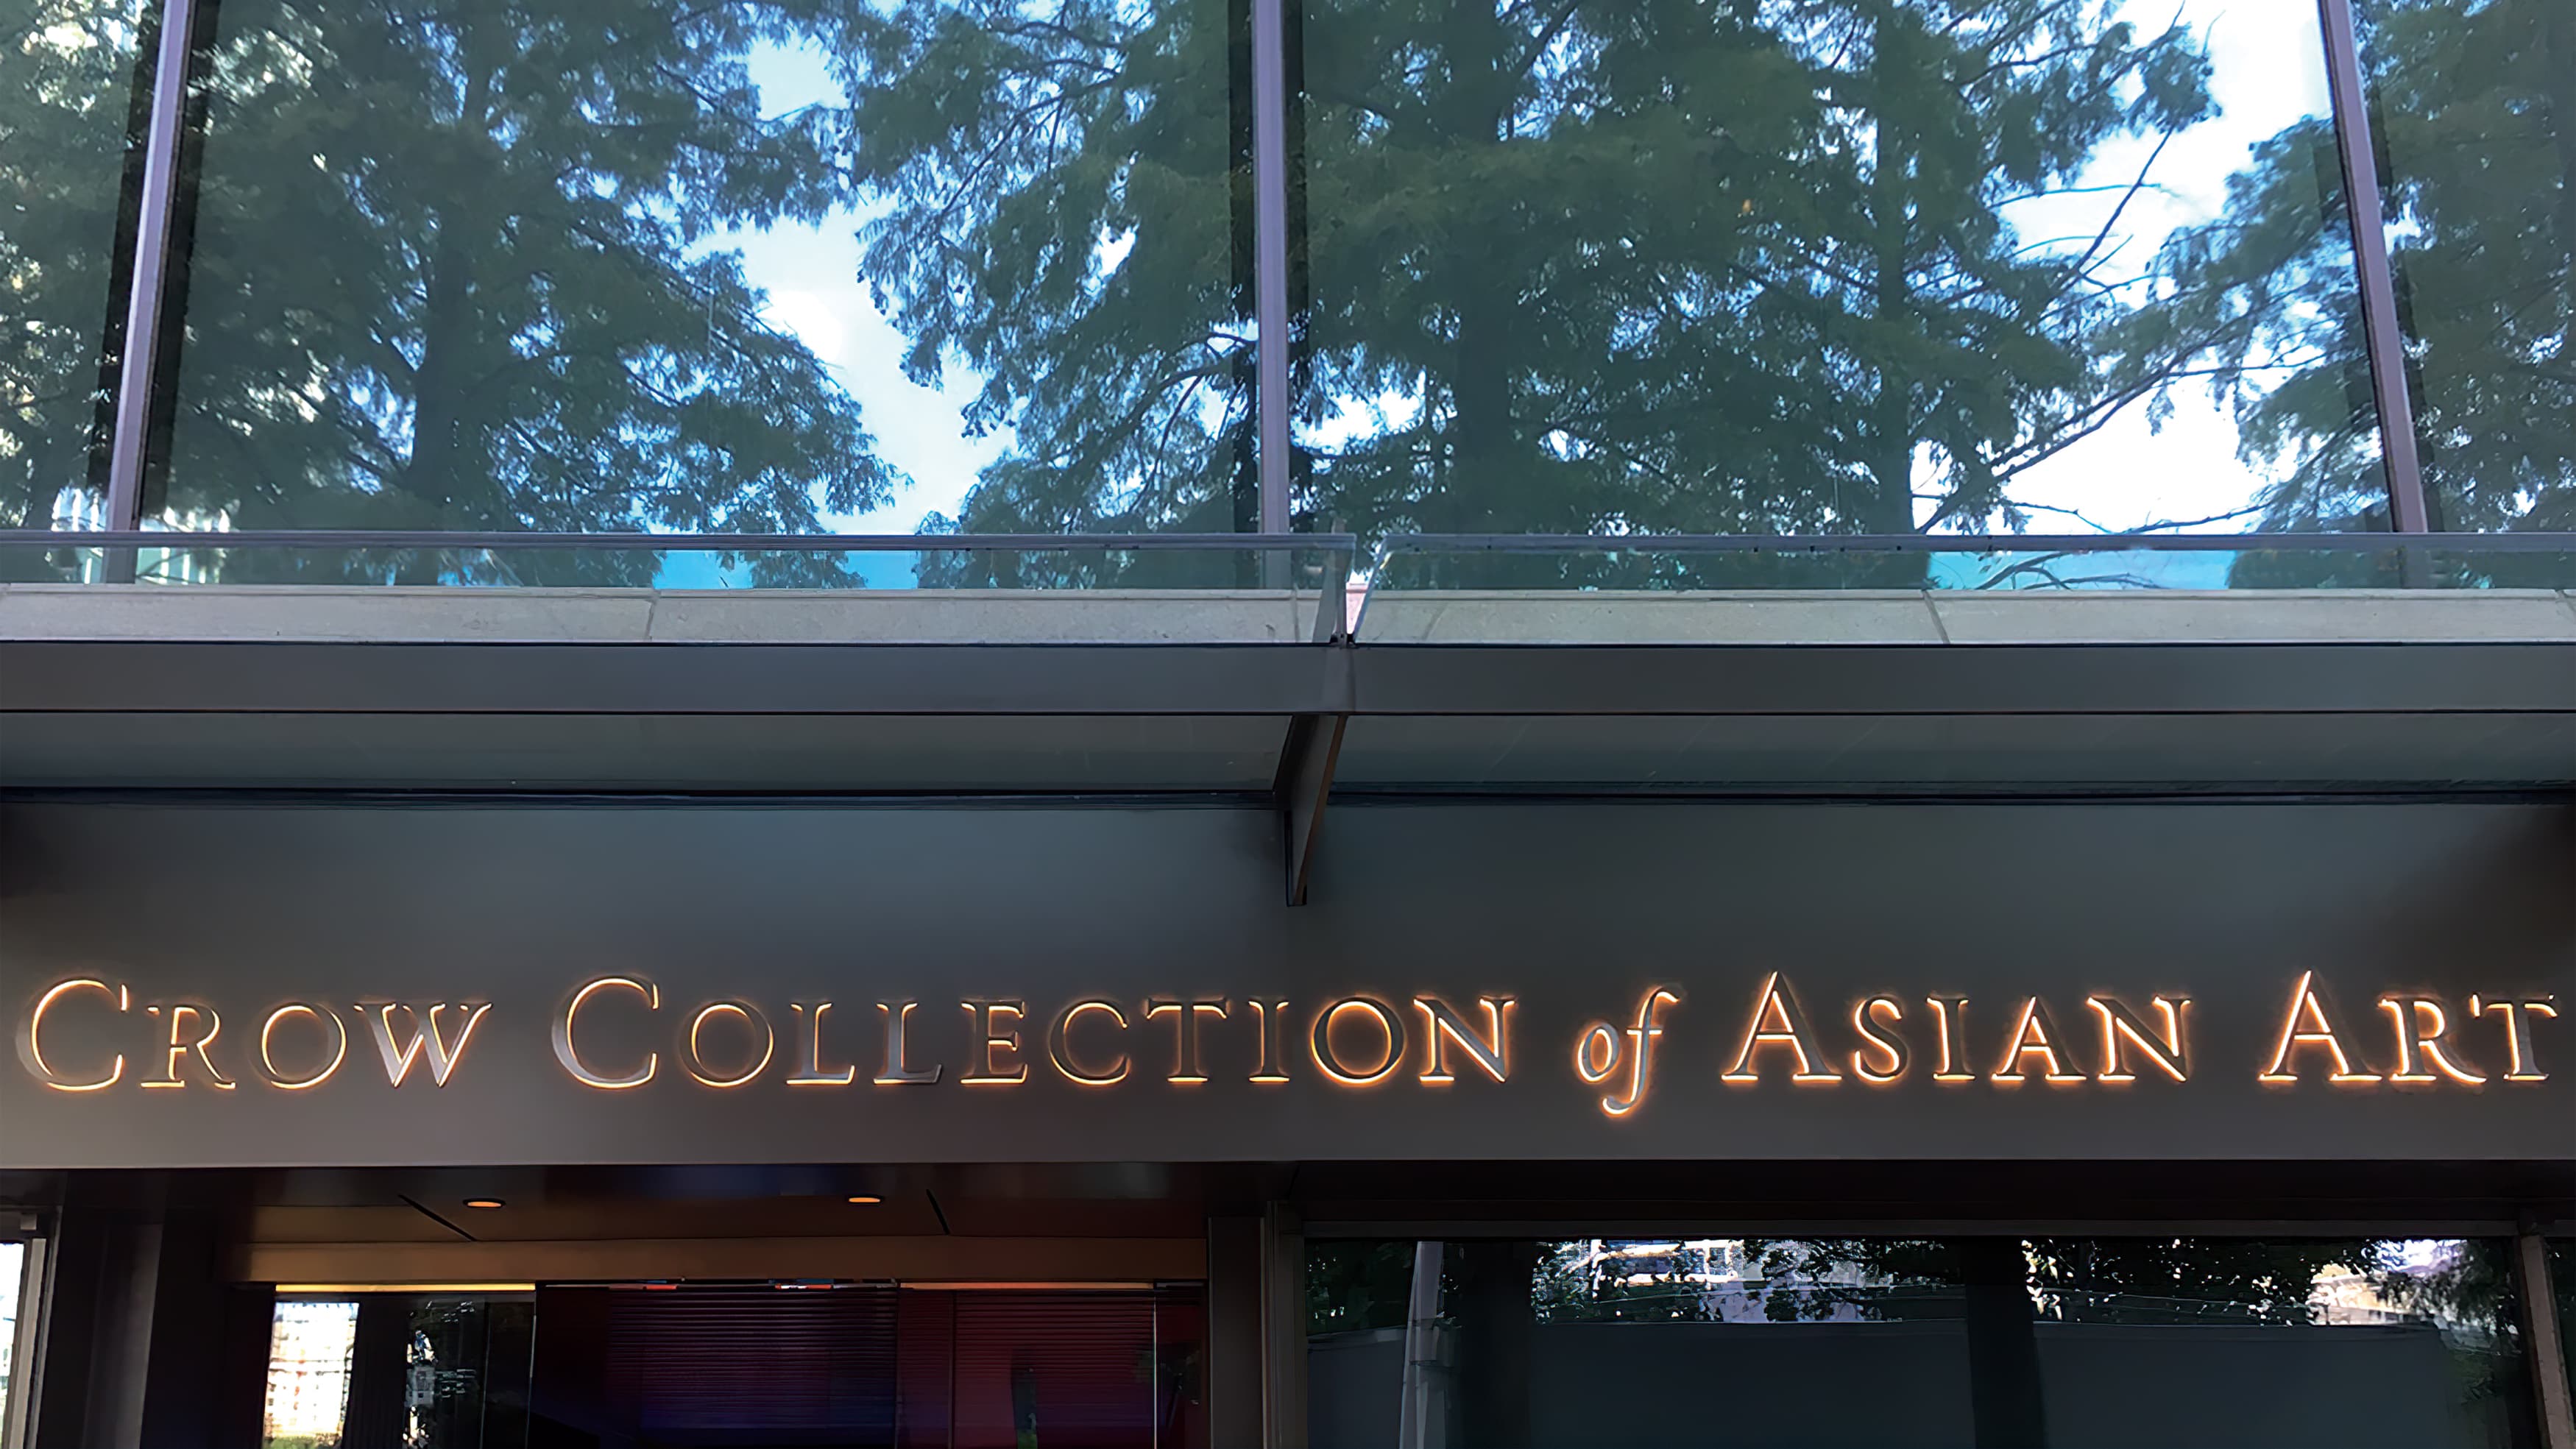 The Crow Collection of Asian Art back-lit identity signage